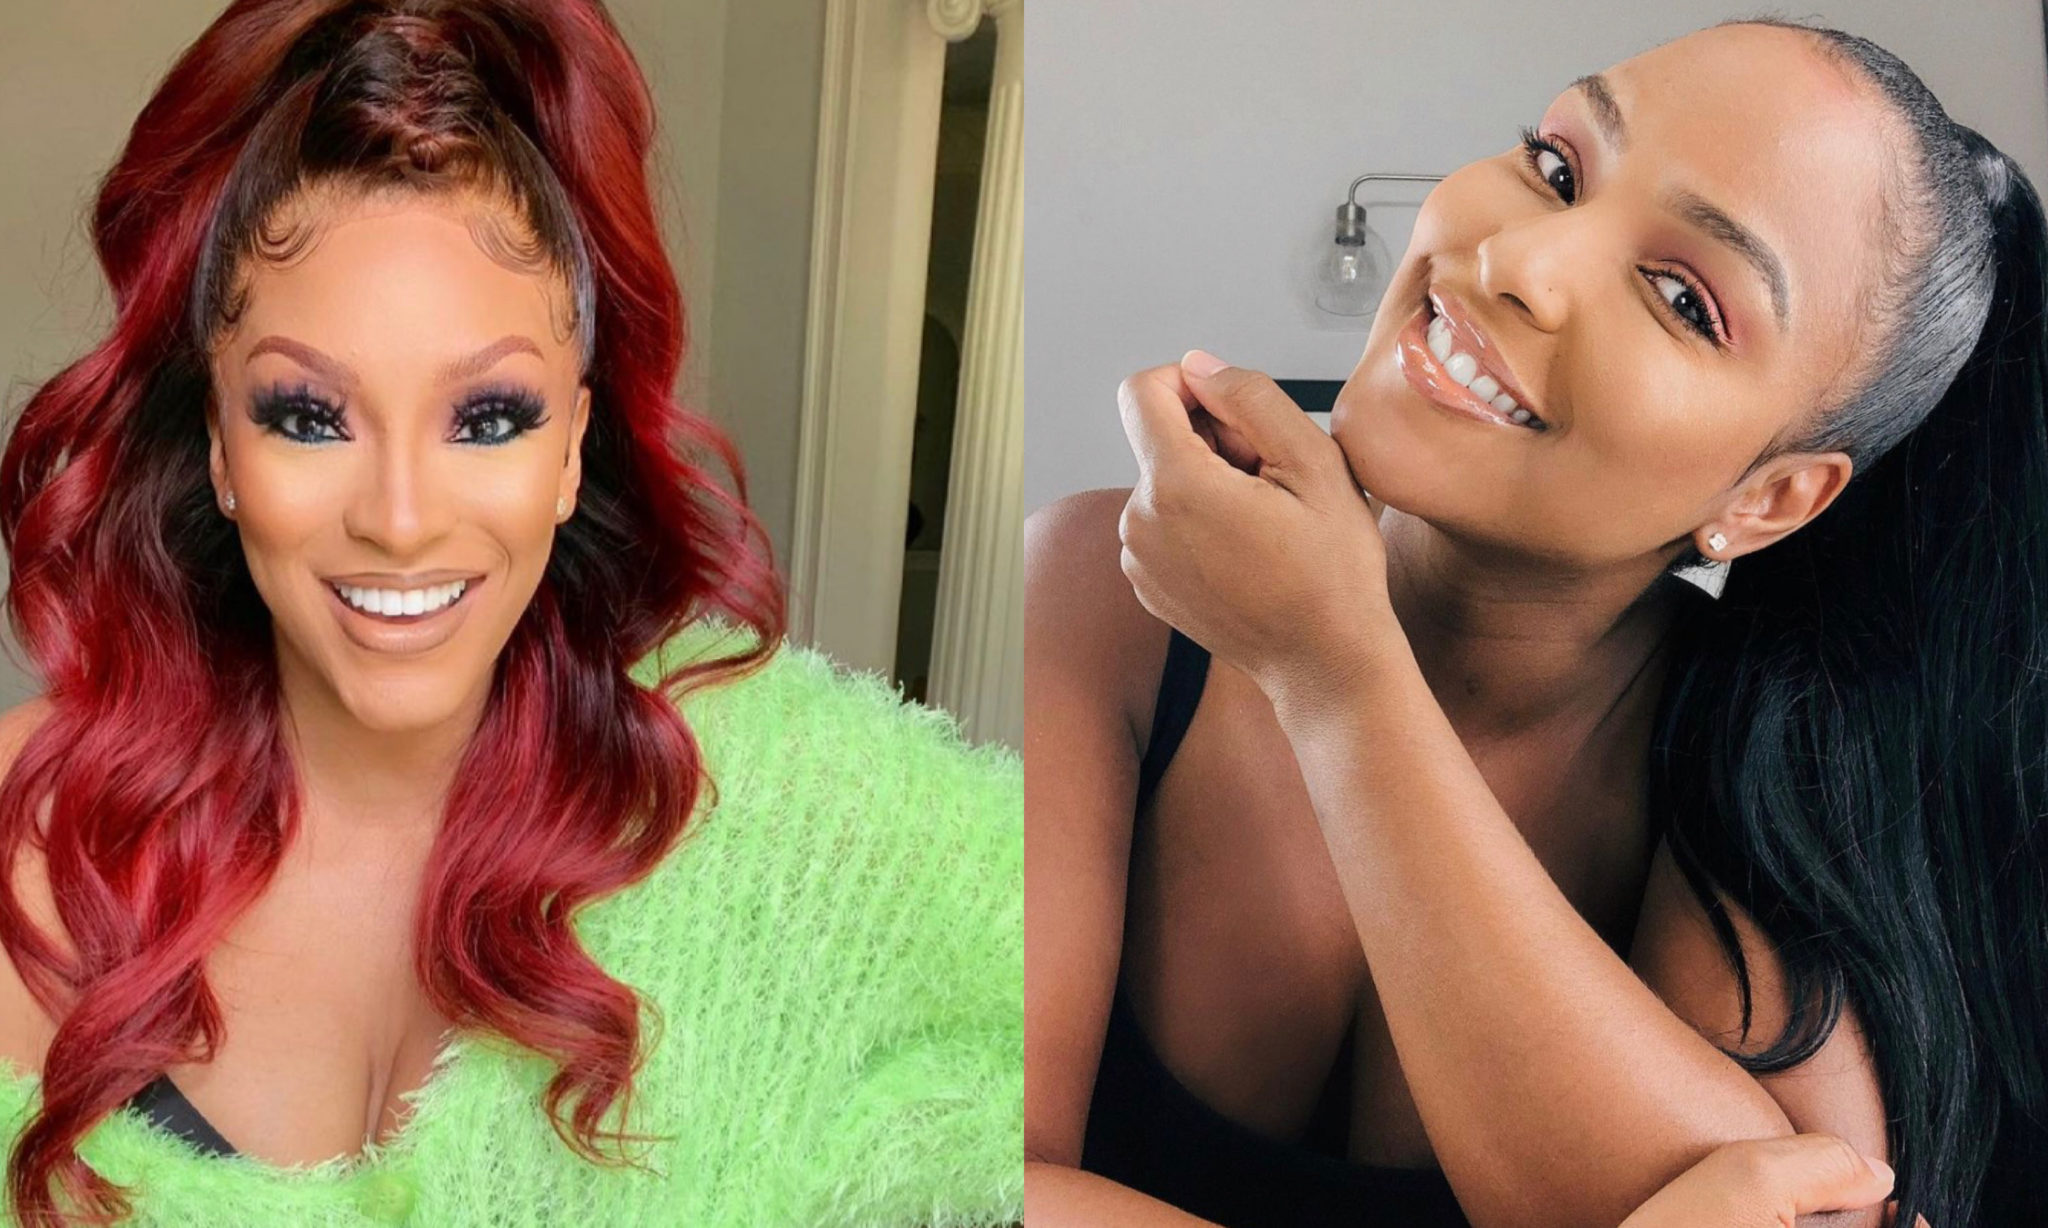 ‘LaToya Is Still Being Shady’: Drew Sidora and LaToya Ali Set Aside Their Beef on Twitter, But Fans are Skeptical